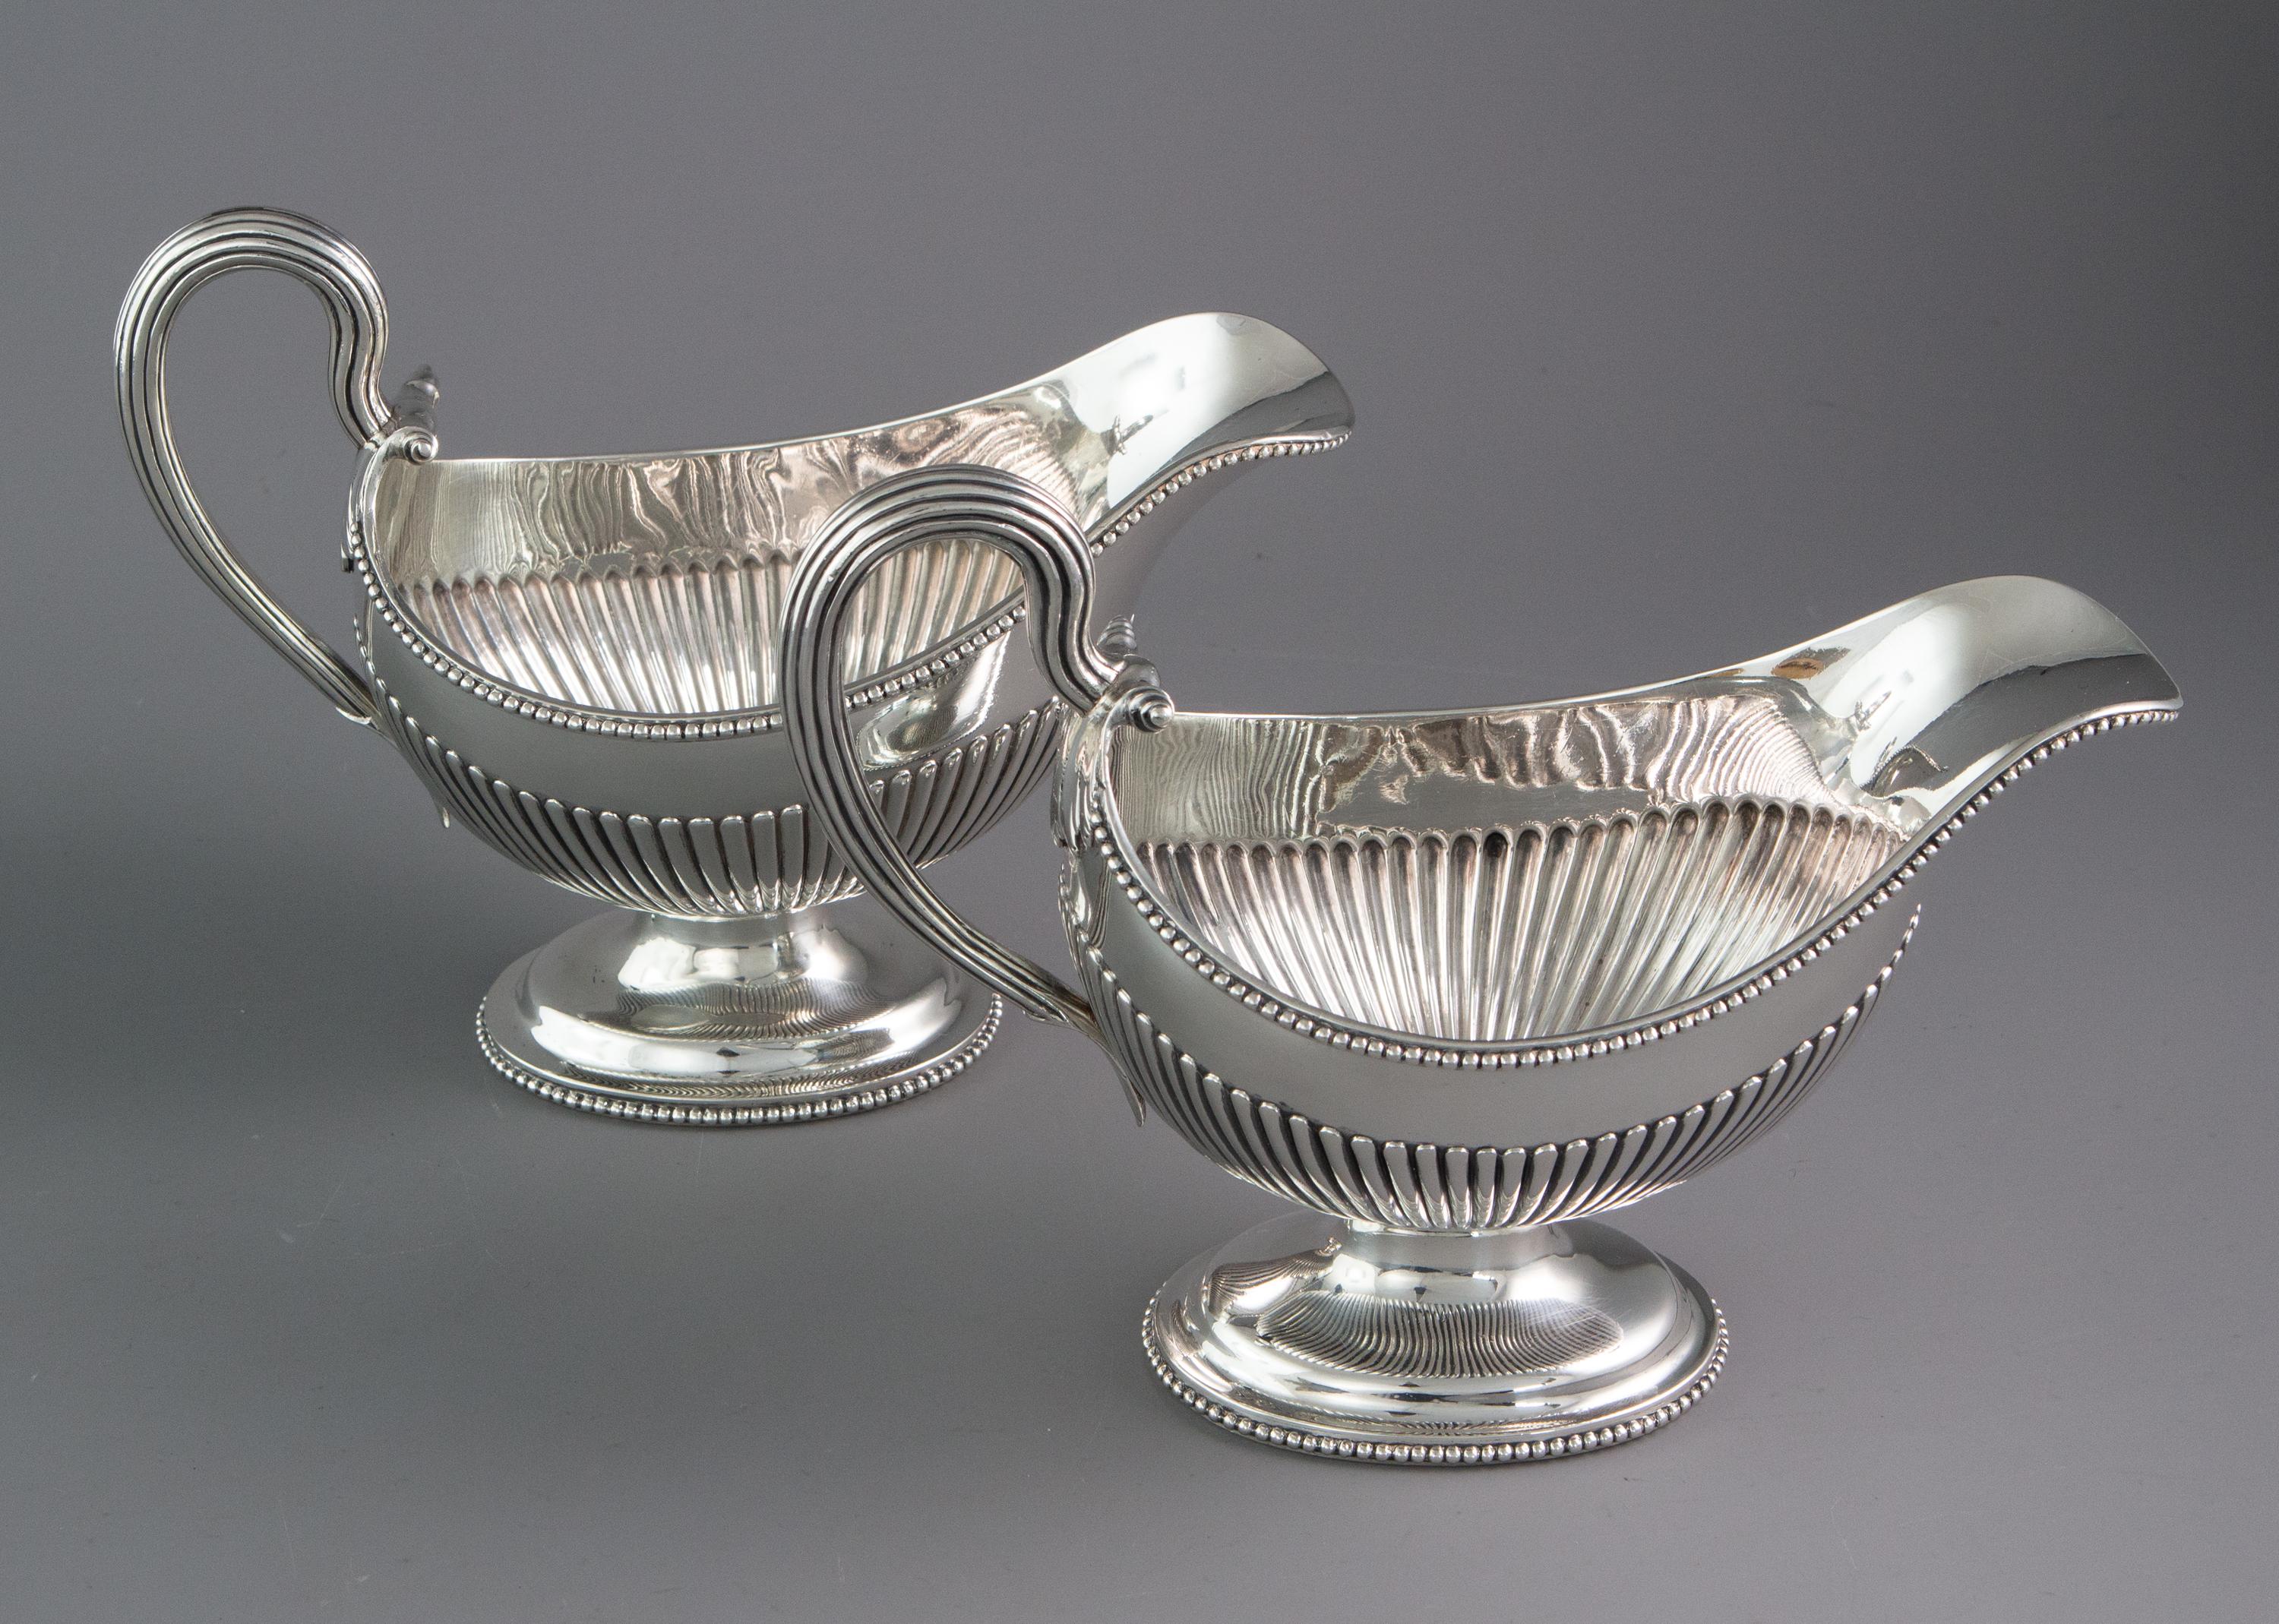 British Pair of George III Silver Sauce Boats, London, 1777